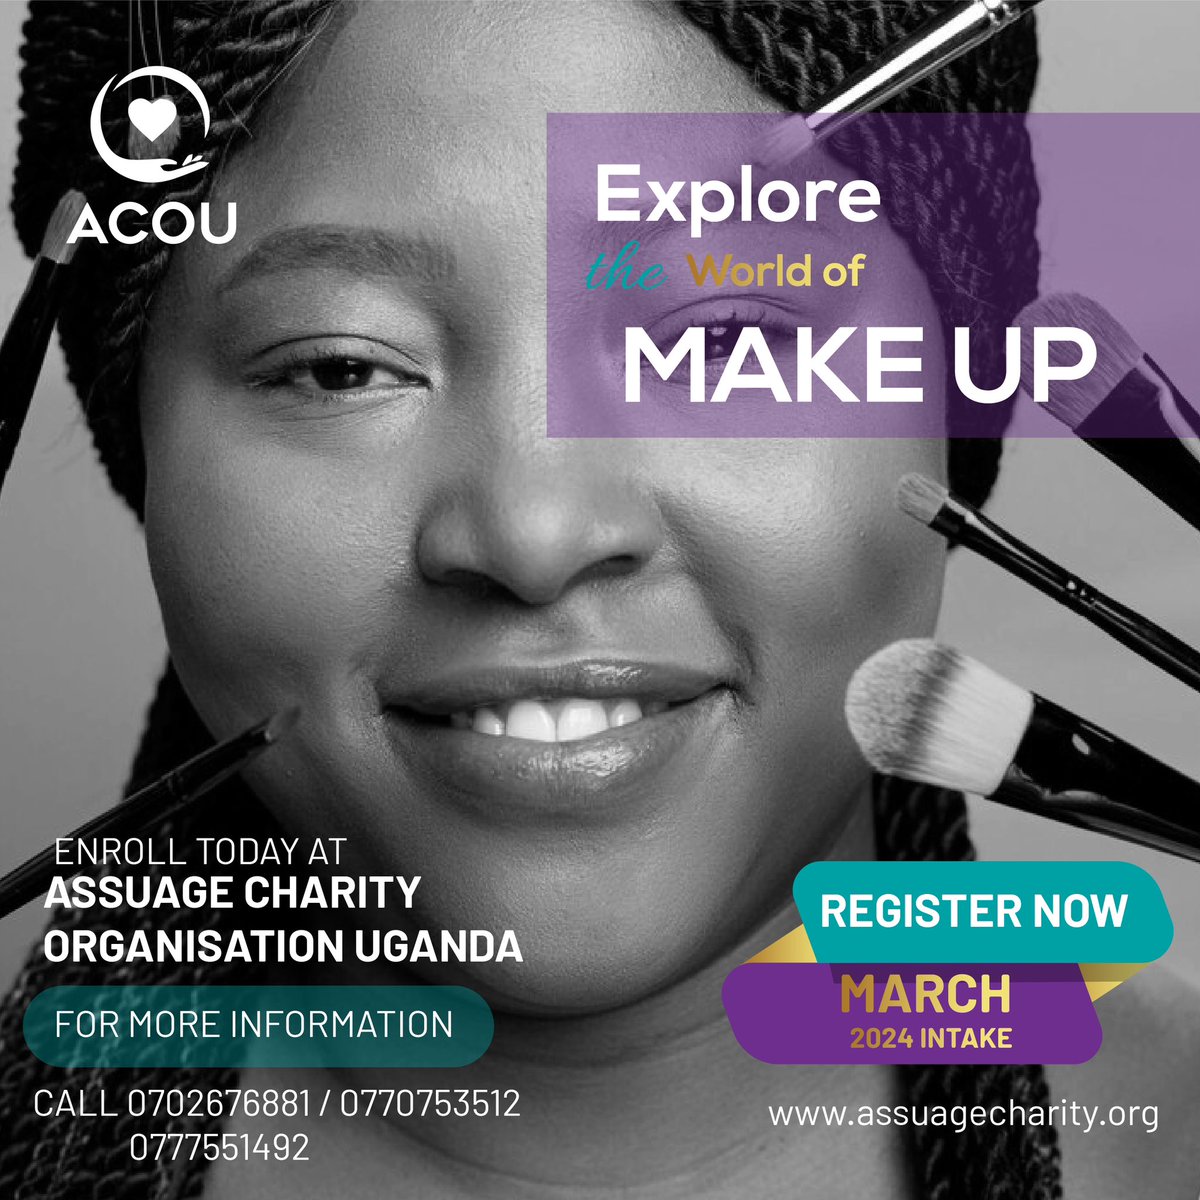 Hello guys this is the time to Register for your makeup classes,Call the numbers on the poster for details and registration,and thanks to those that have already registered,can’t wait to work with you all as we skill ourselves @acou_256